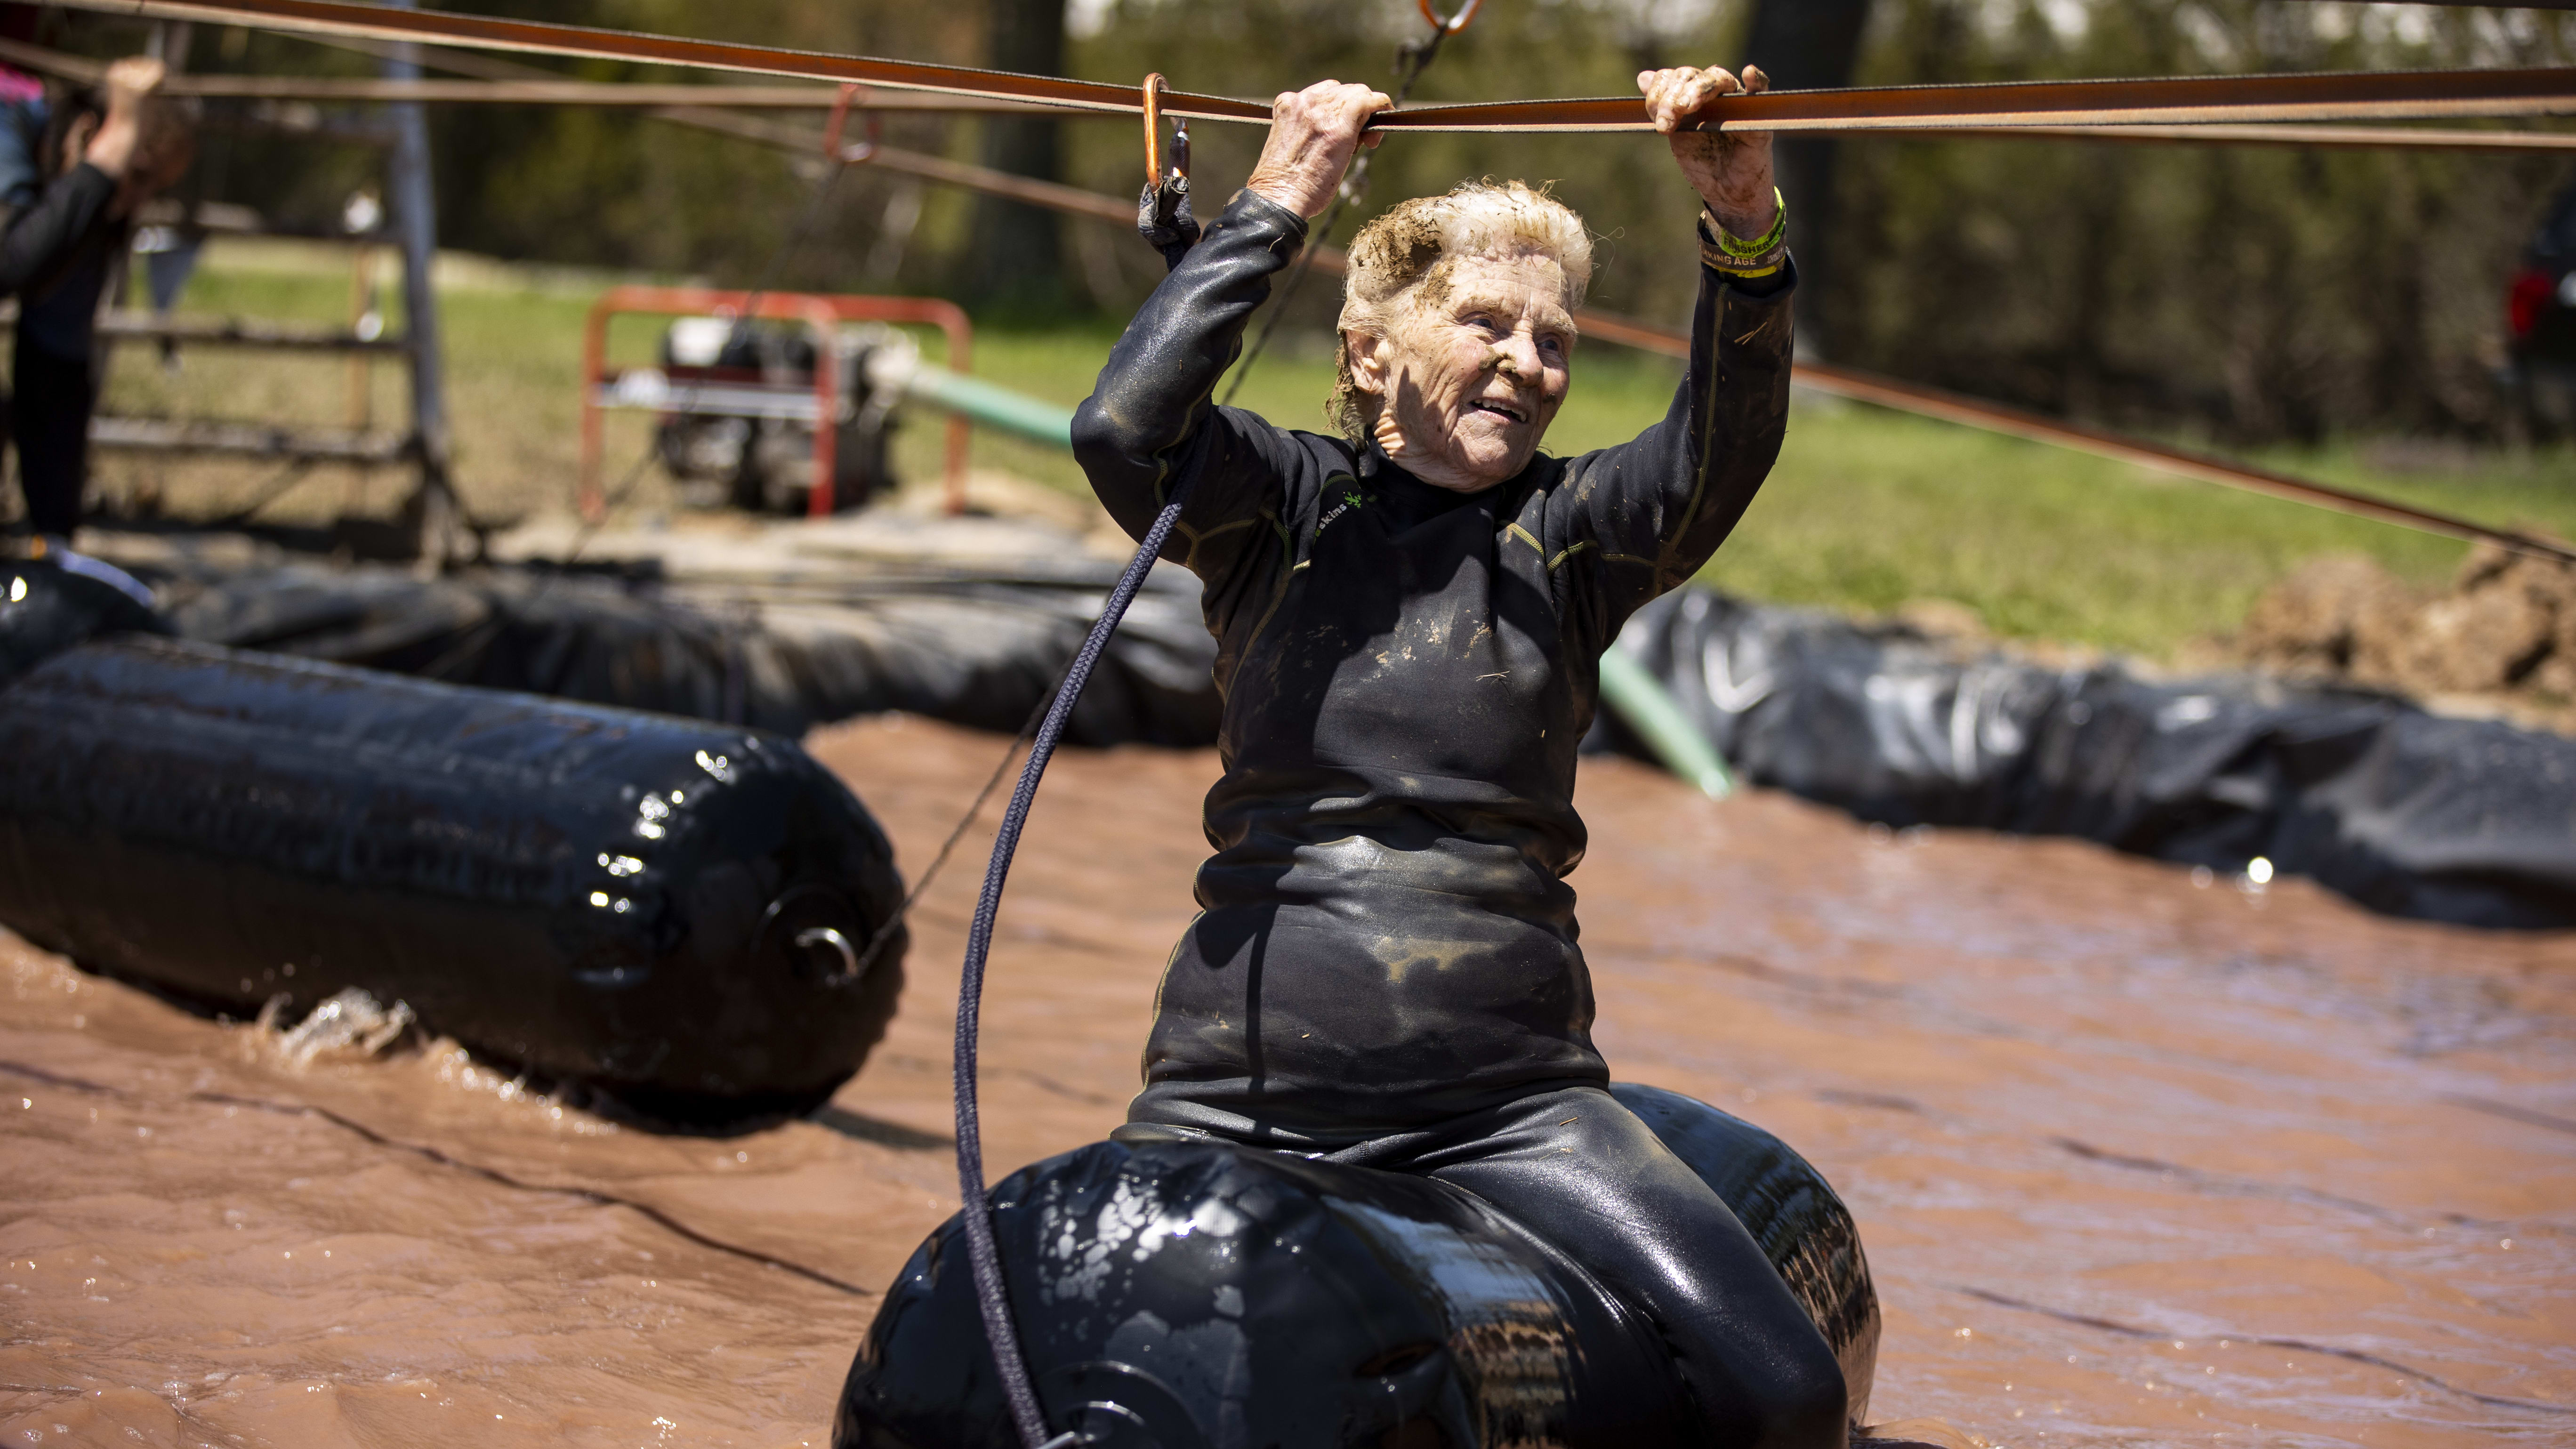 Mildred Wilson competes in a Tough Mudder event.